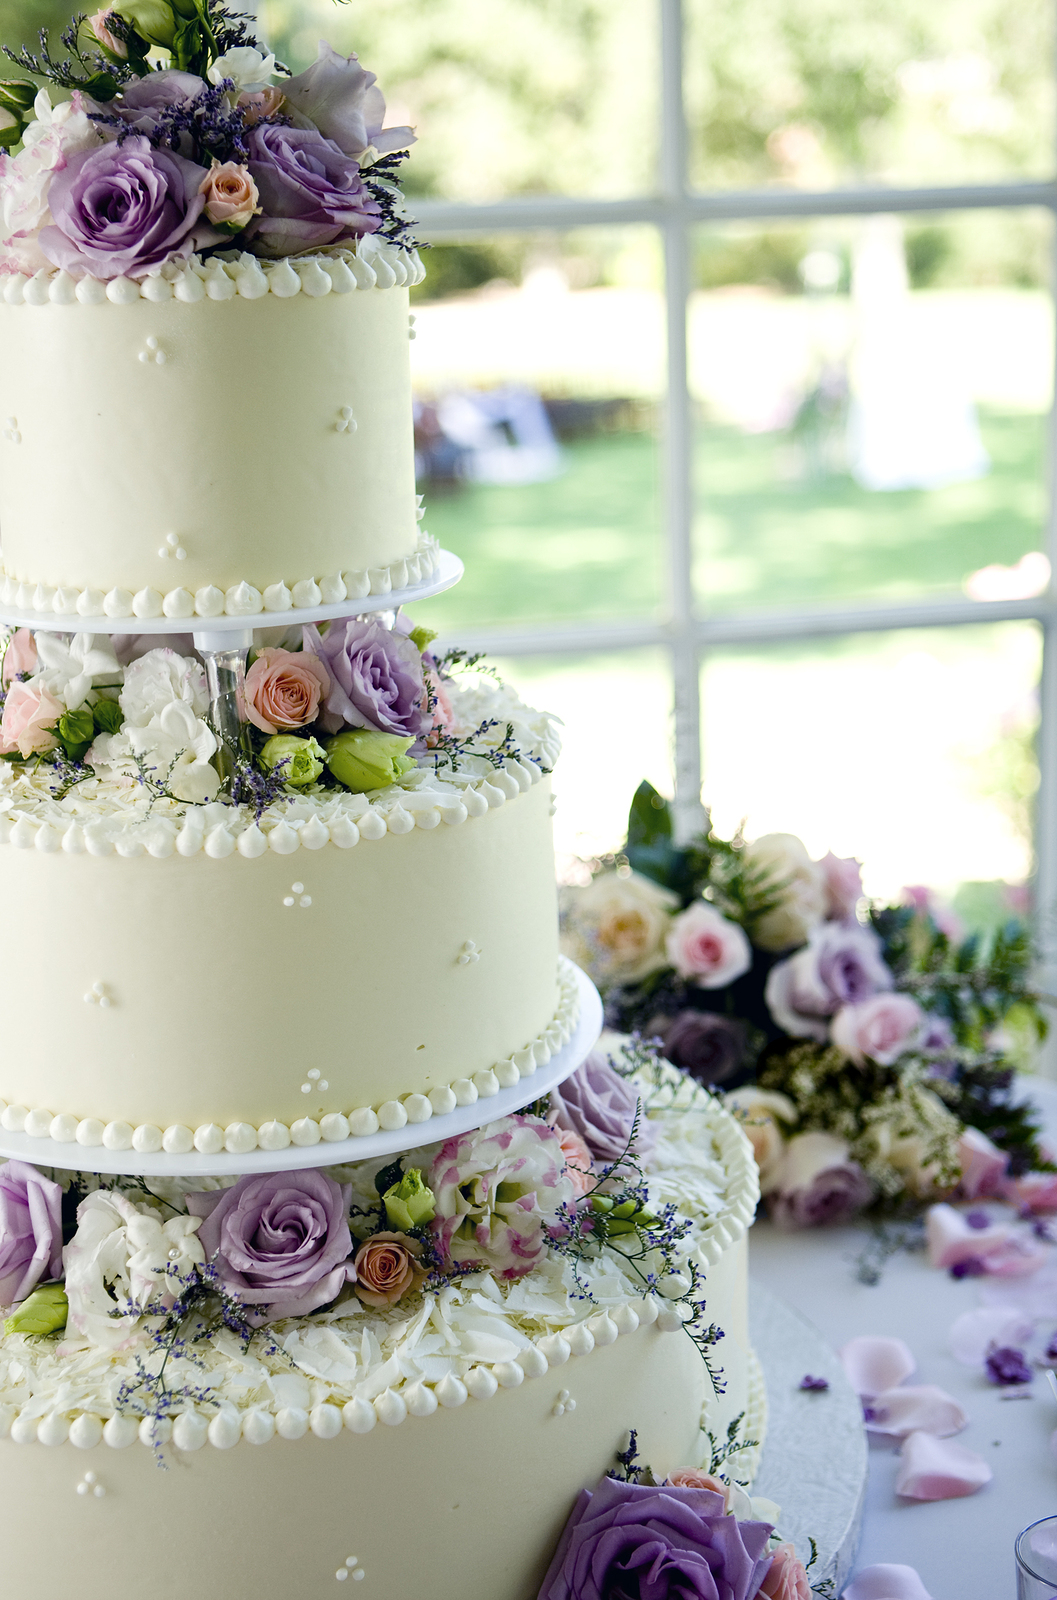 Saving money on your wedding cake with non-edible tiers